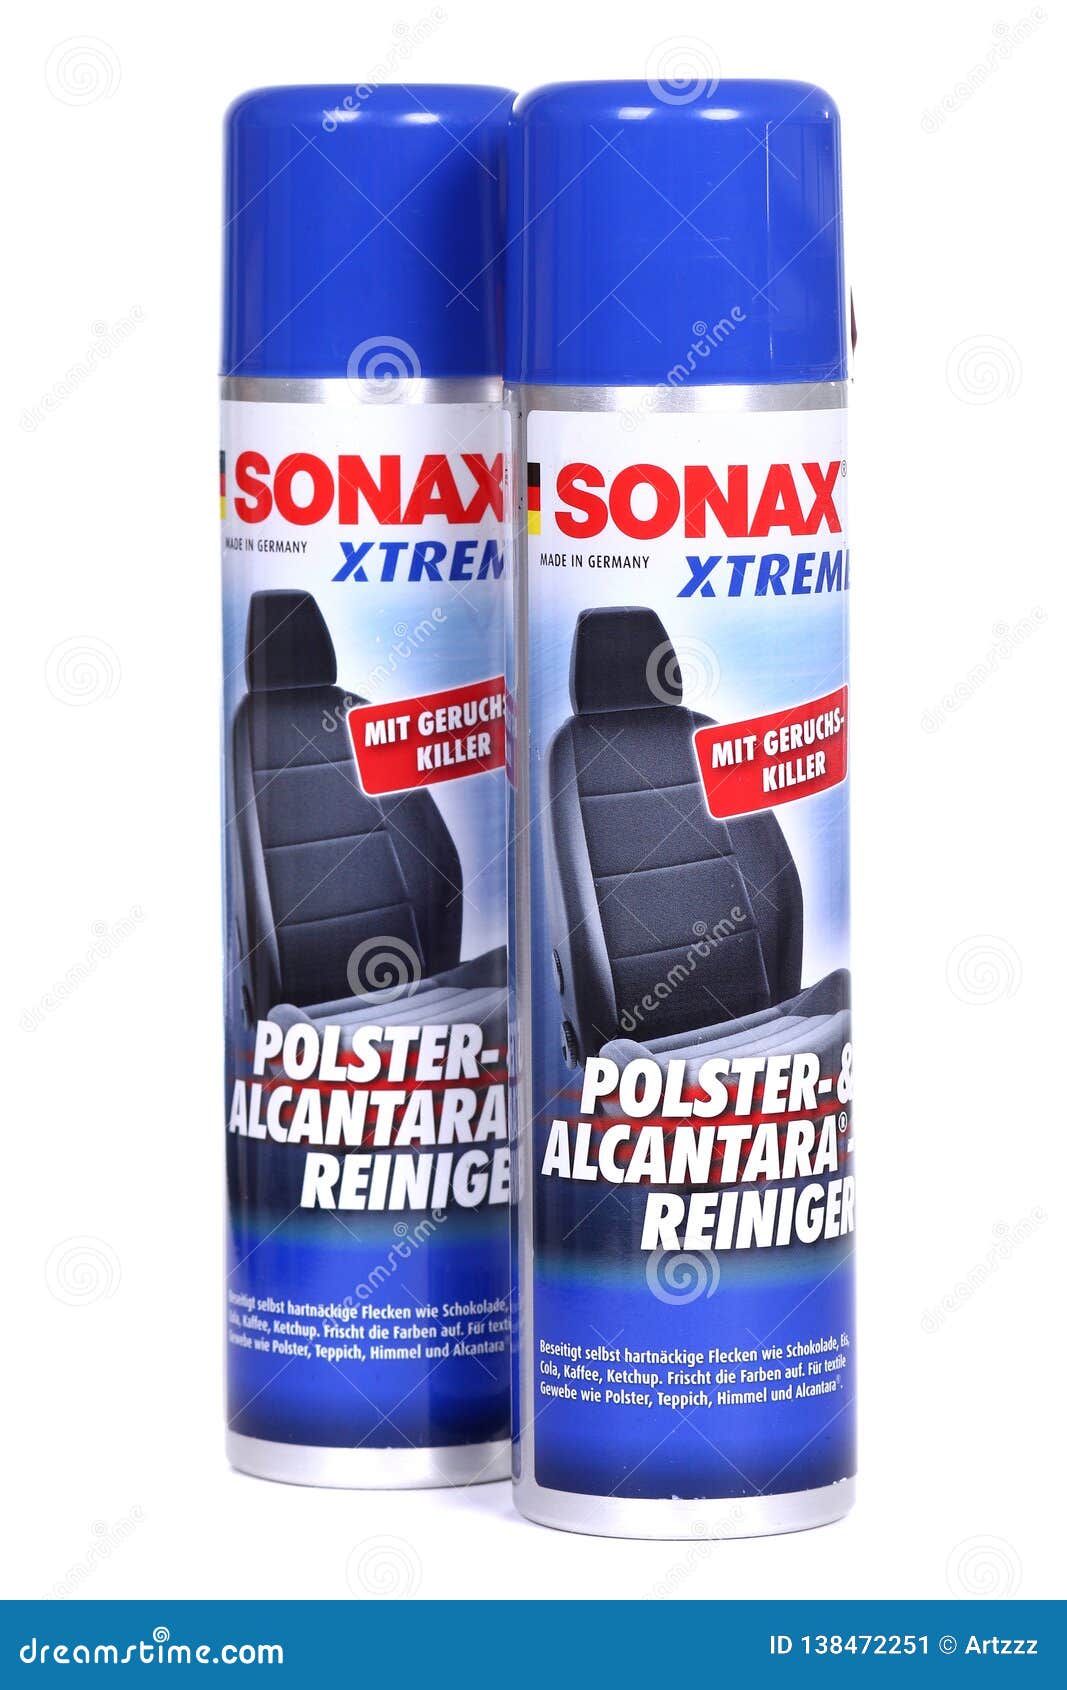 https://thumbs.dreamstime.com/z/car-interior-cleaner-sonax-xtreme-novyy-urengoy-russia-january-isolated-over-white-background-138472251.jpg